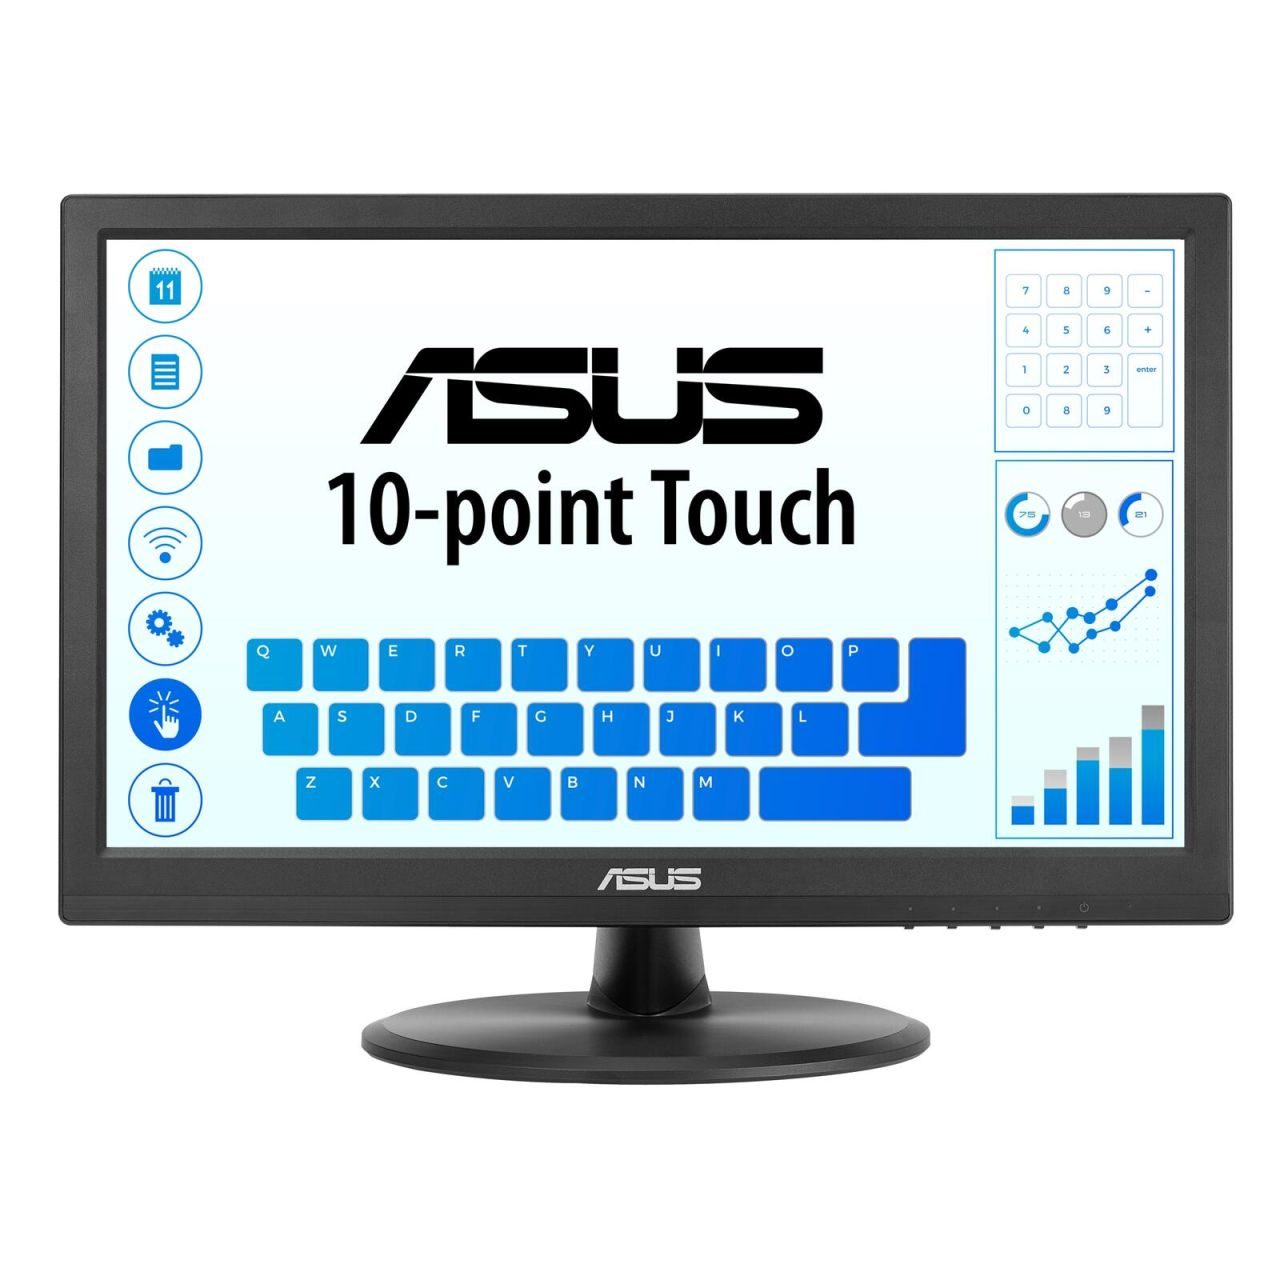 ASUS VT168HR 10-Punkt-Touch Monitor 39,6 cm (15.6")